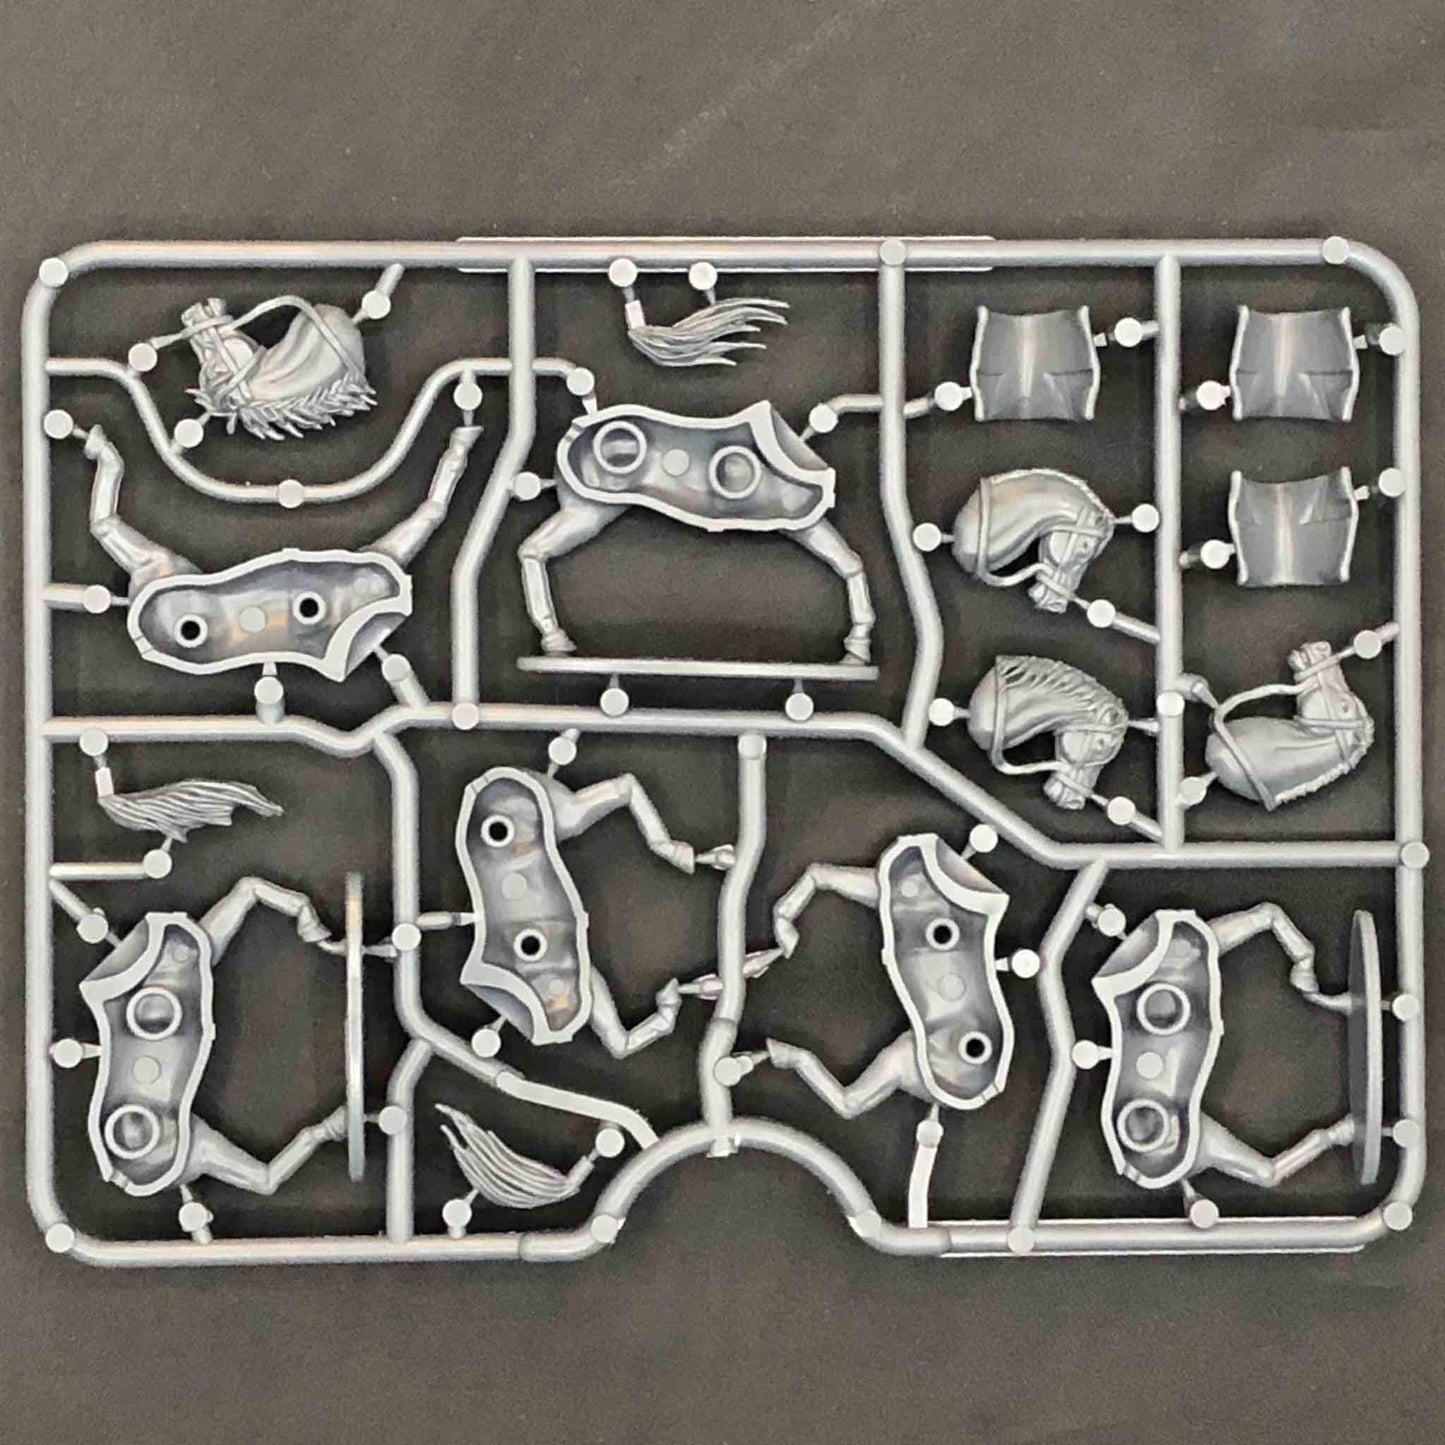 General Accoutrements horses sprue